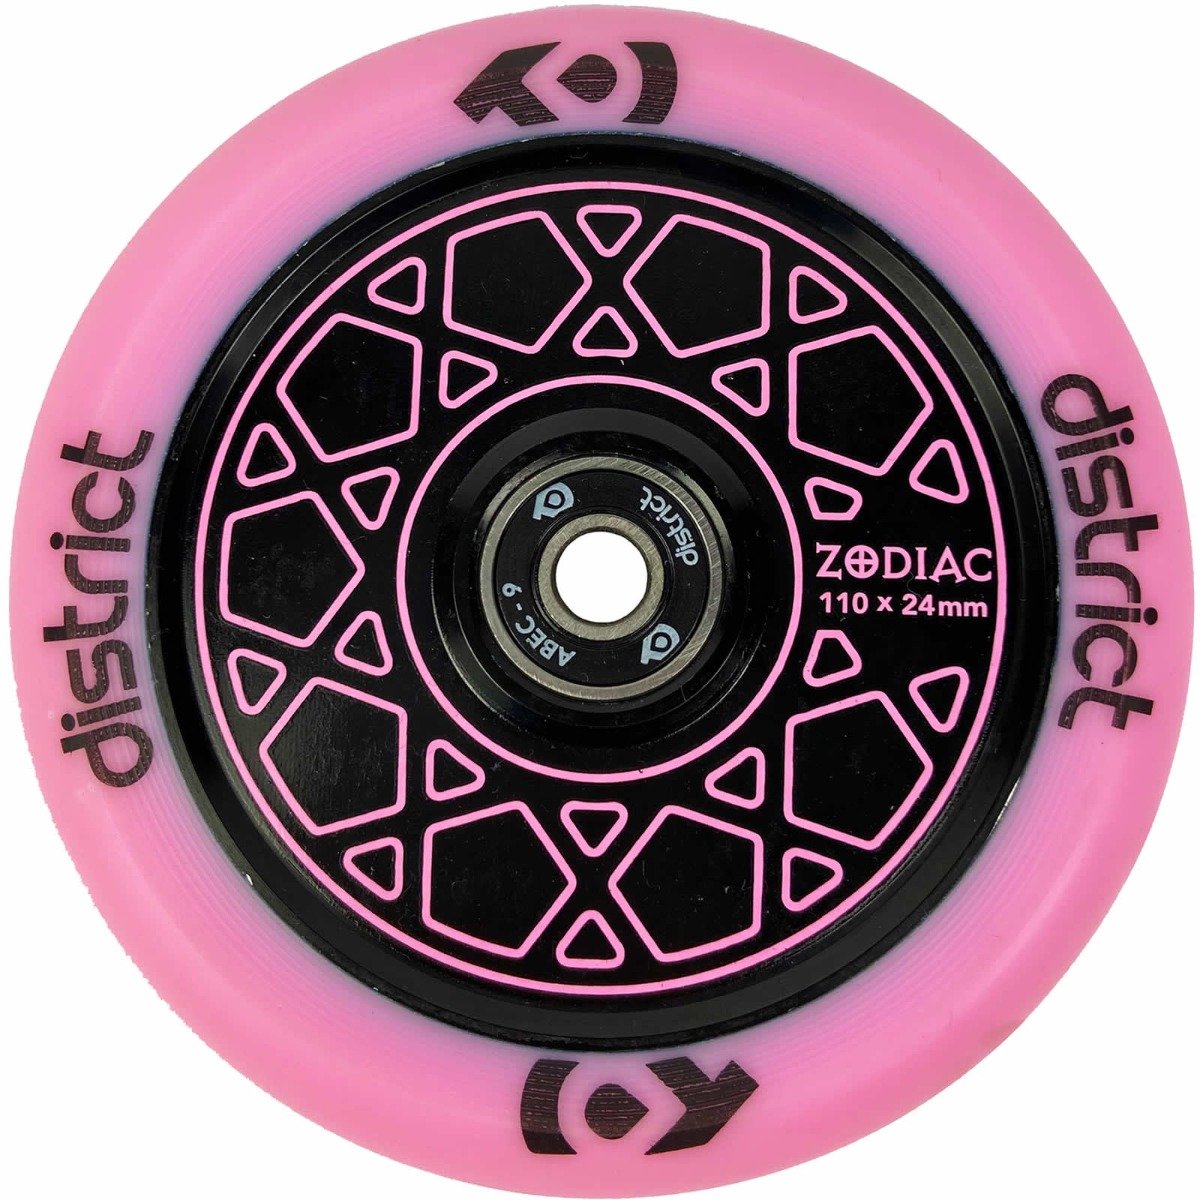 An image of District Zodiac Black Pink Stunt Scooter Wheels - 110mm